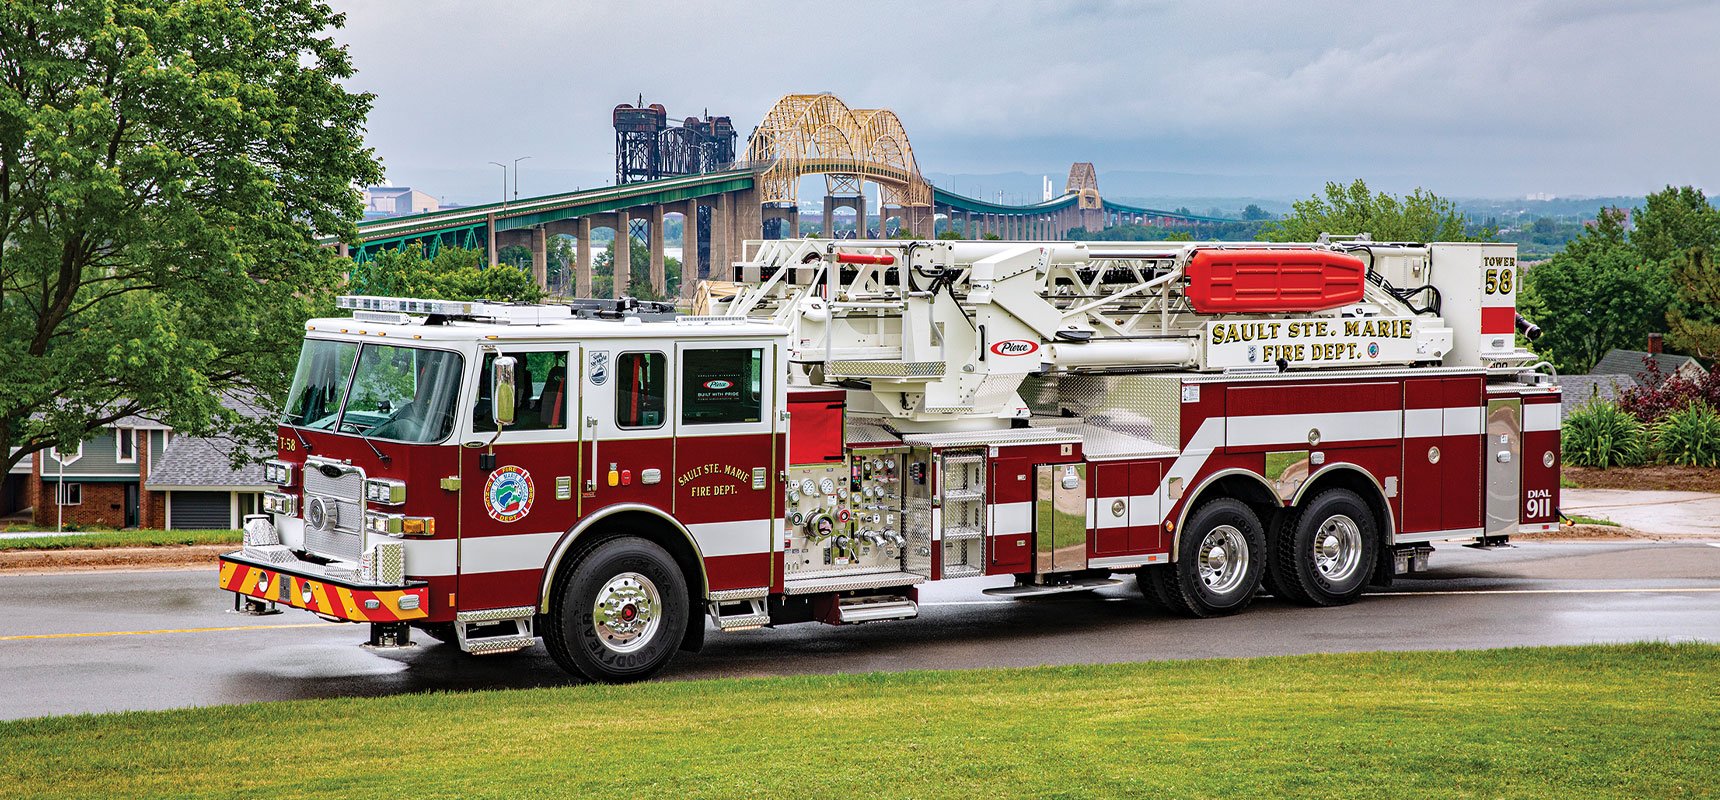 A red and white urban aerial fire truck is parked in front of a large bridge and green landscape.